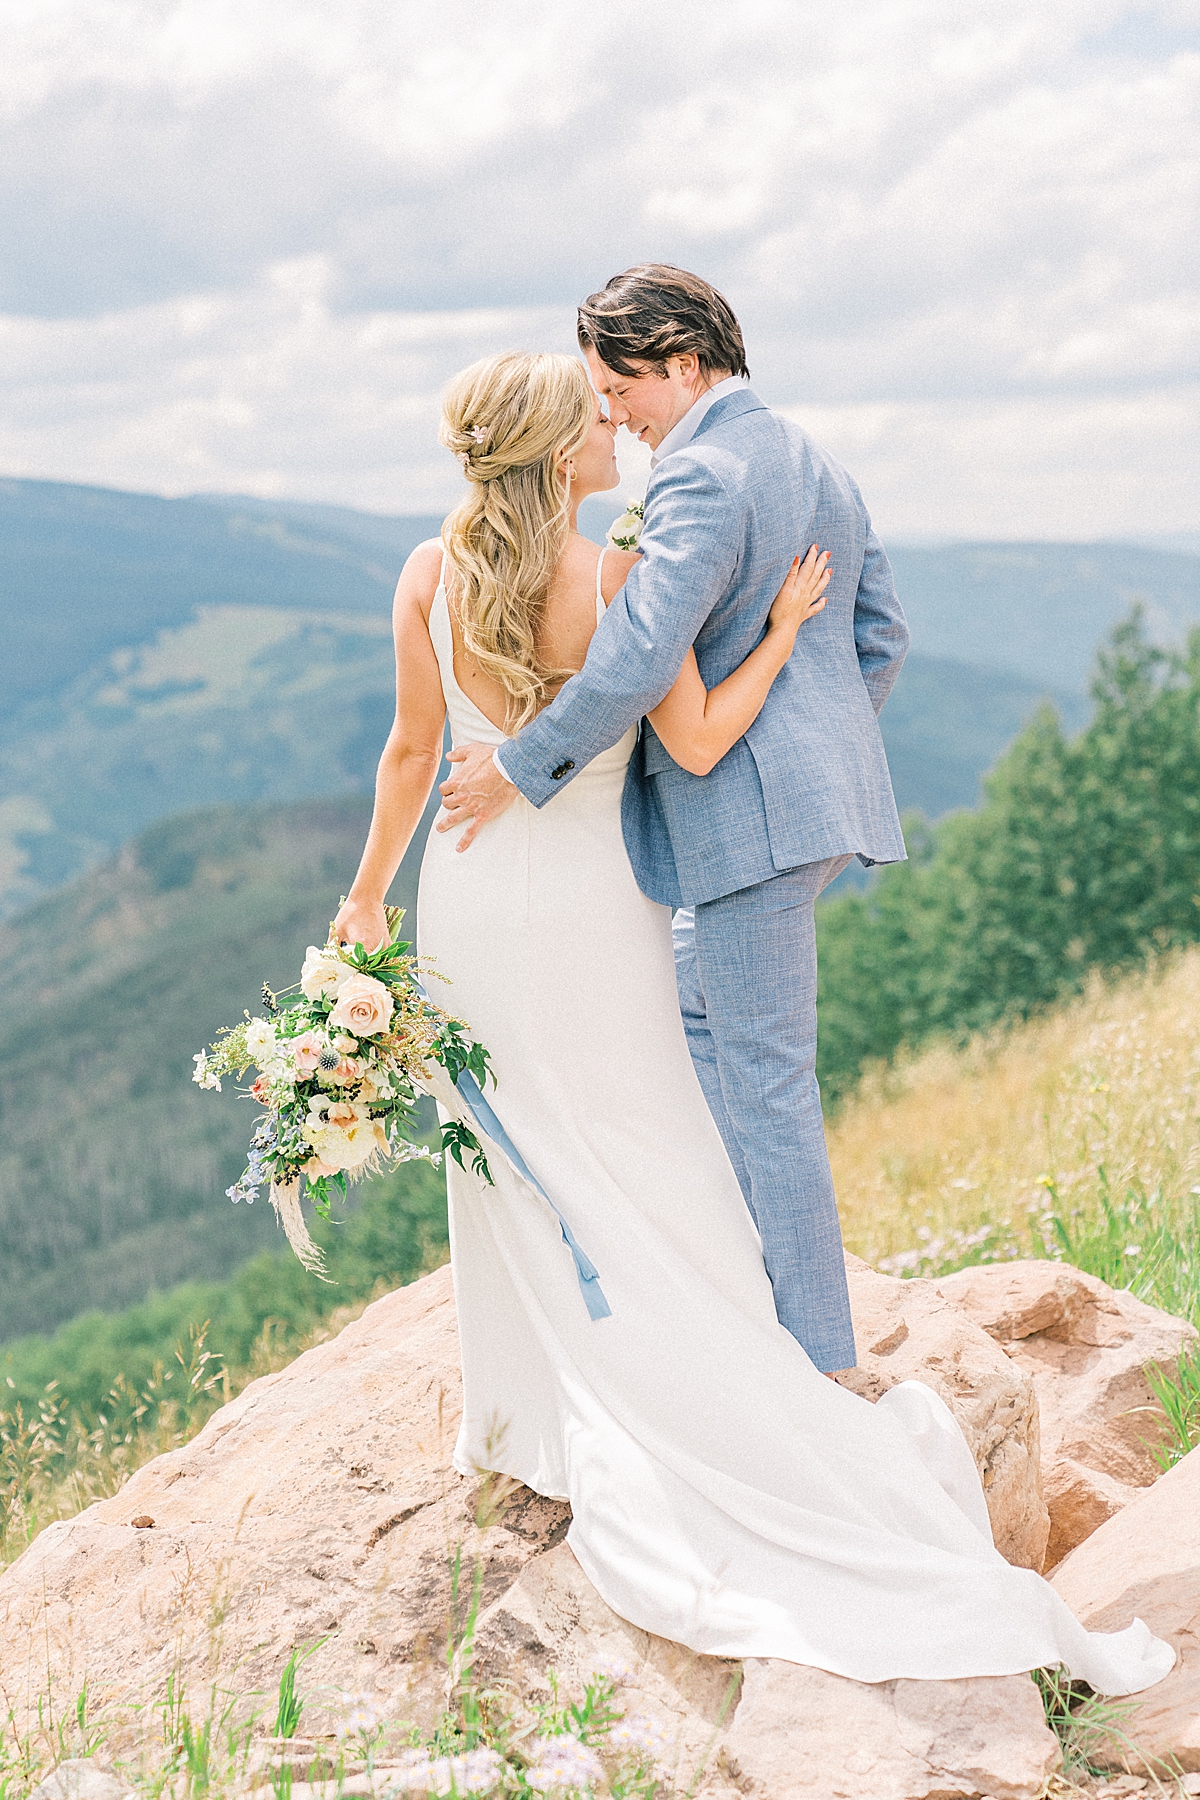 Vail mountain kissing from a summer bride and groom.